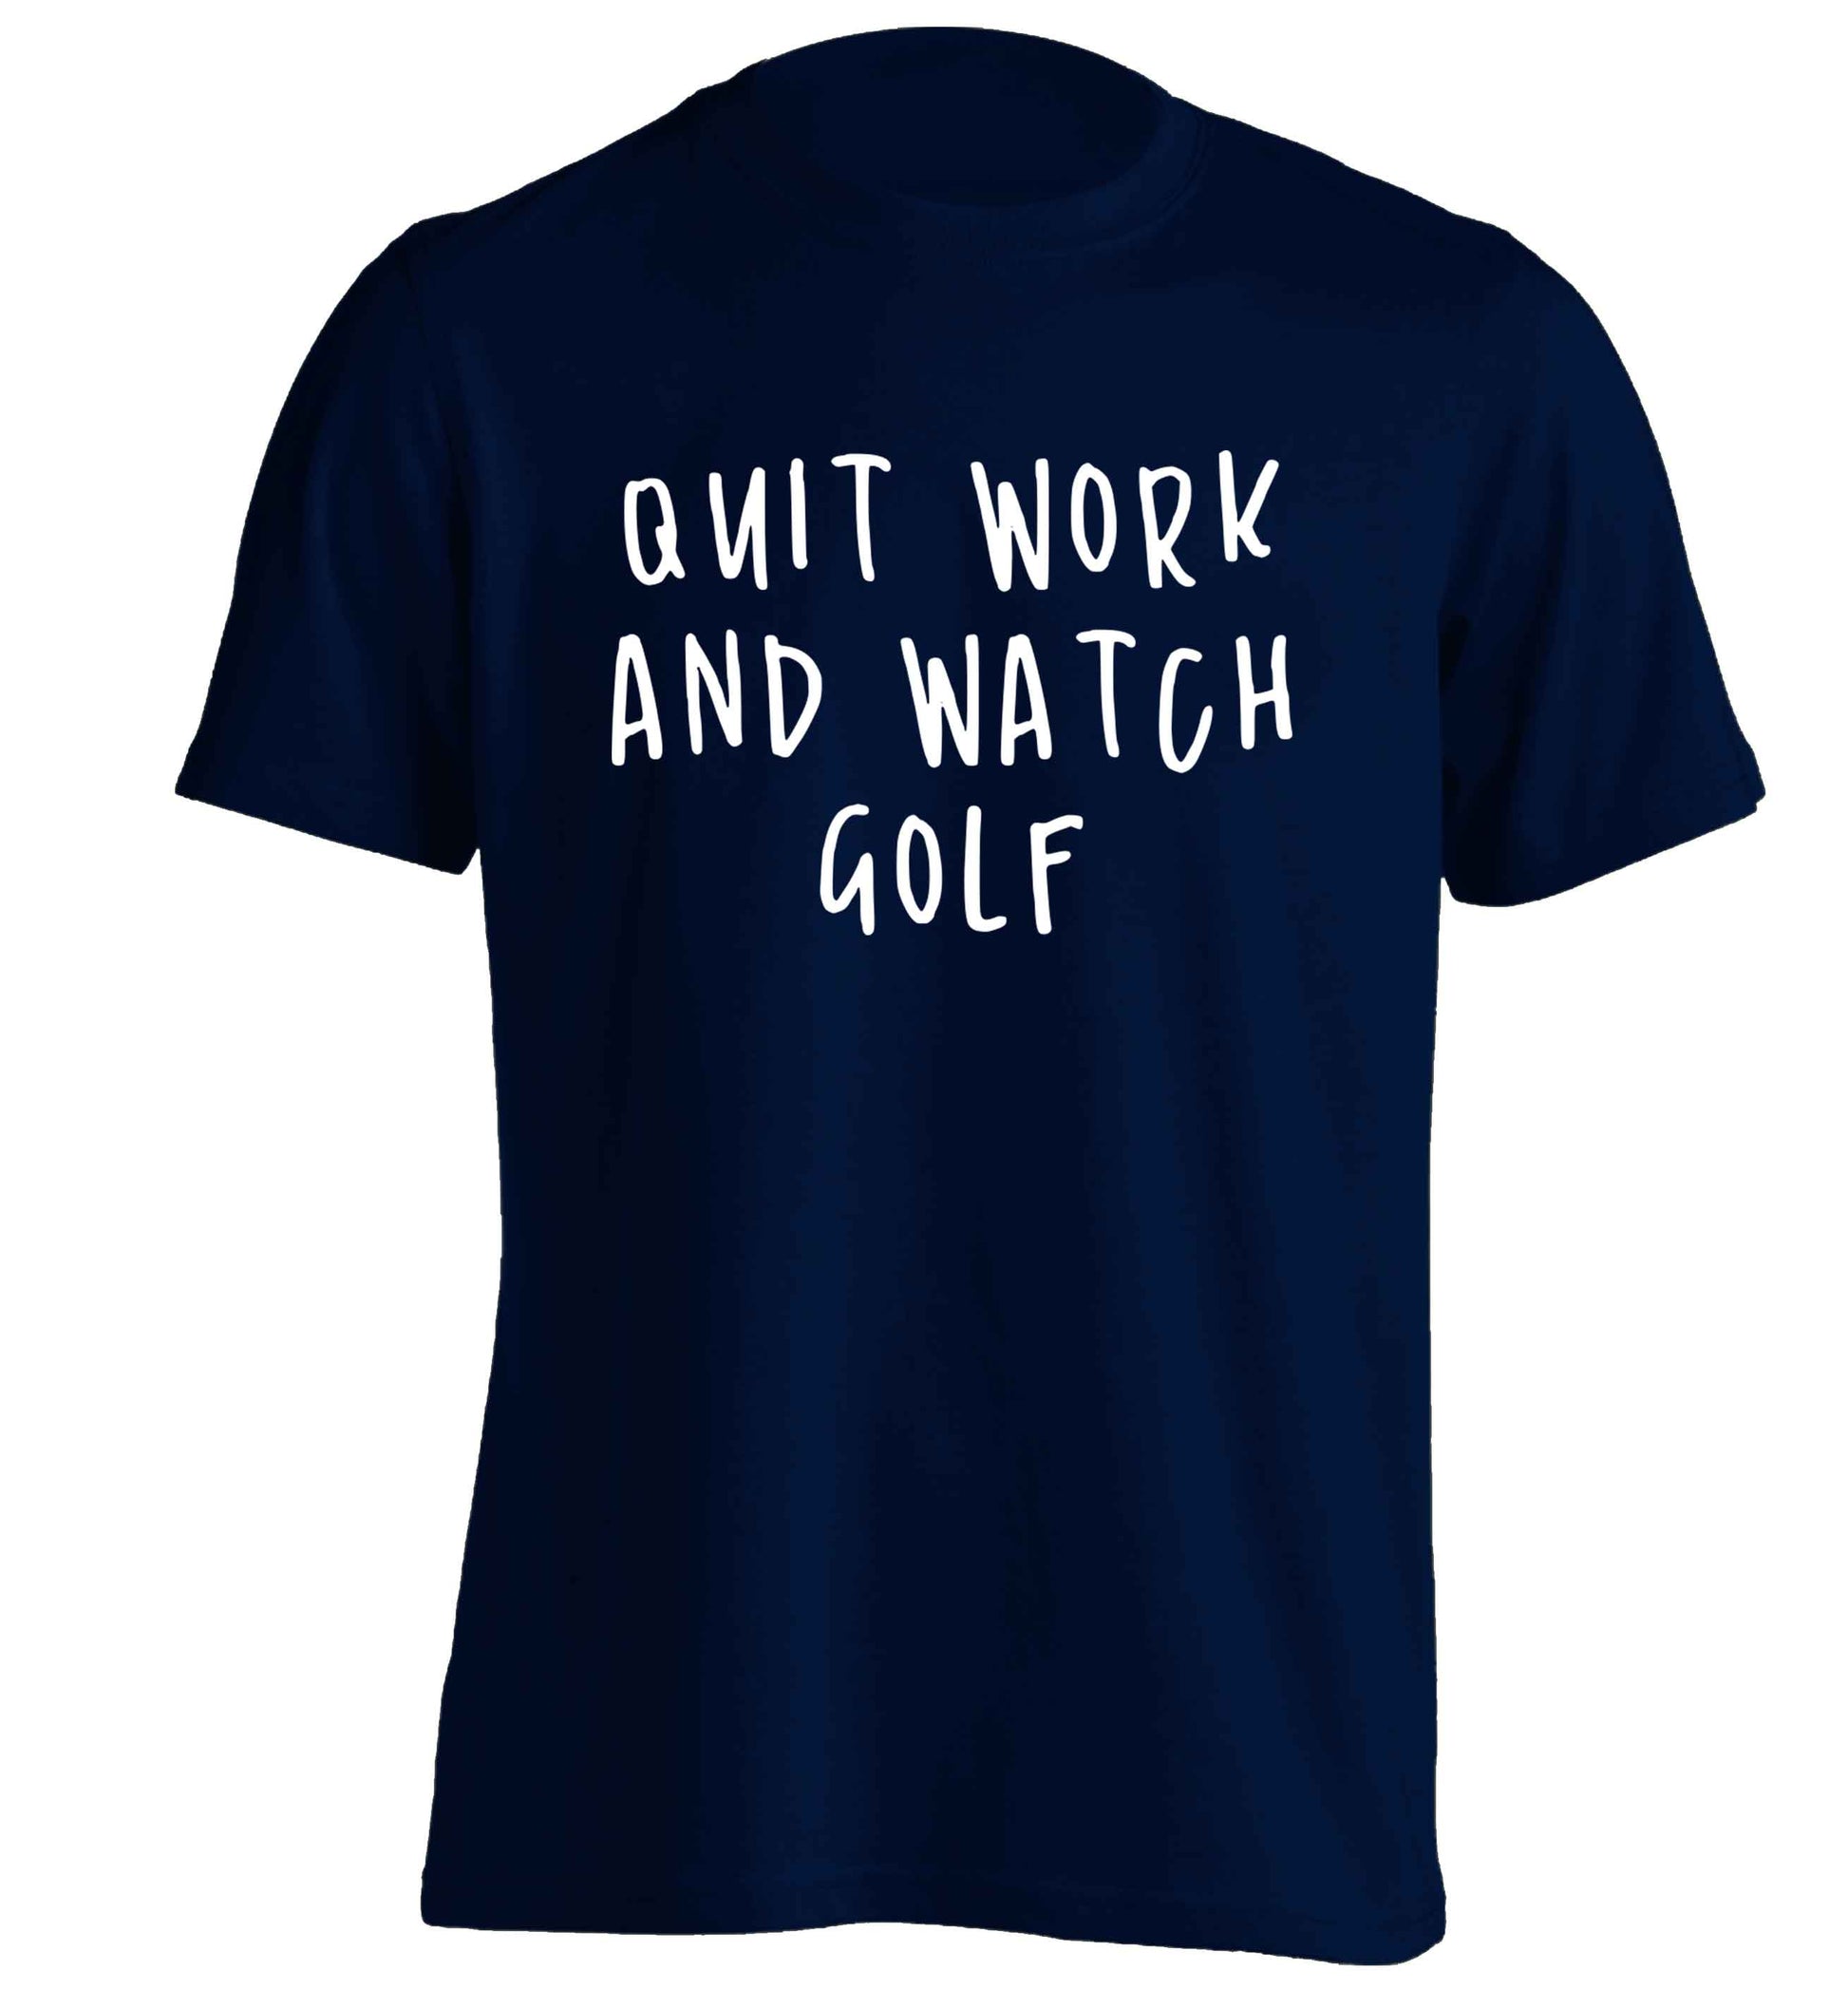 Quit work and watch golf adults unisex navy Tshirt 2XL